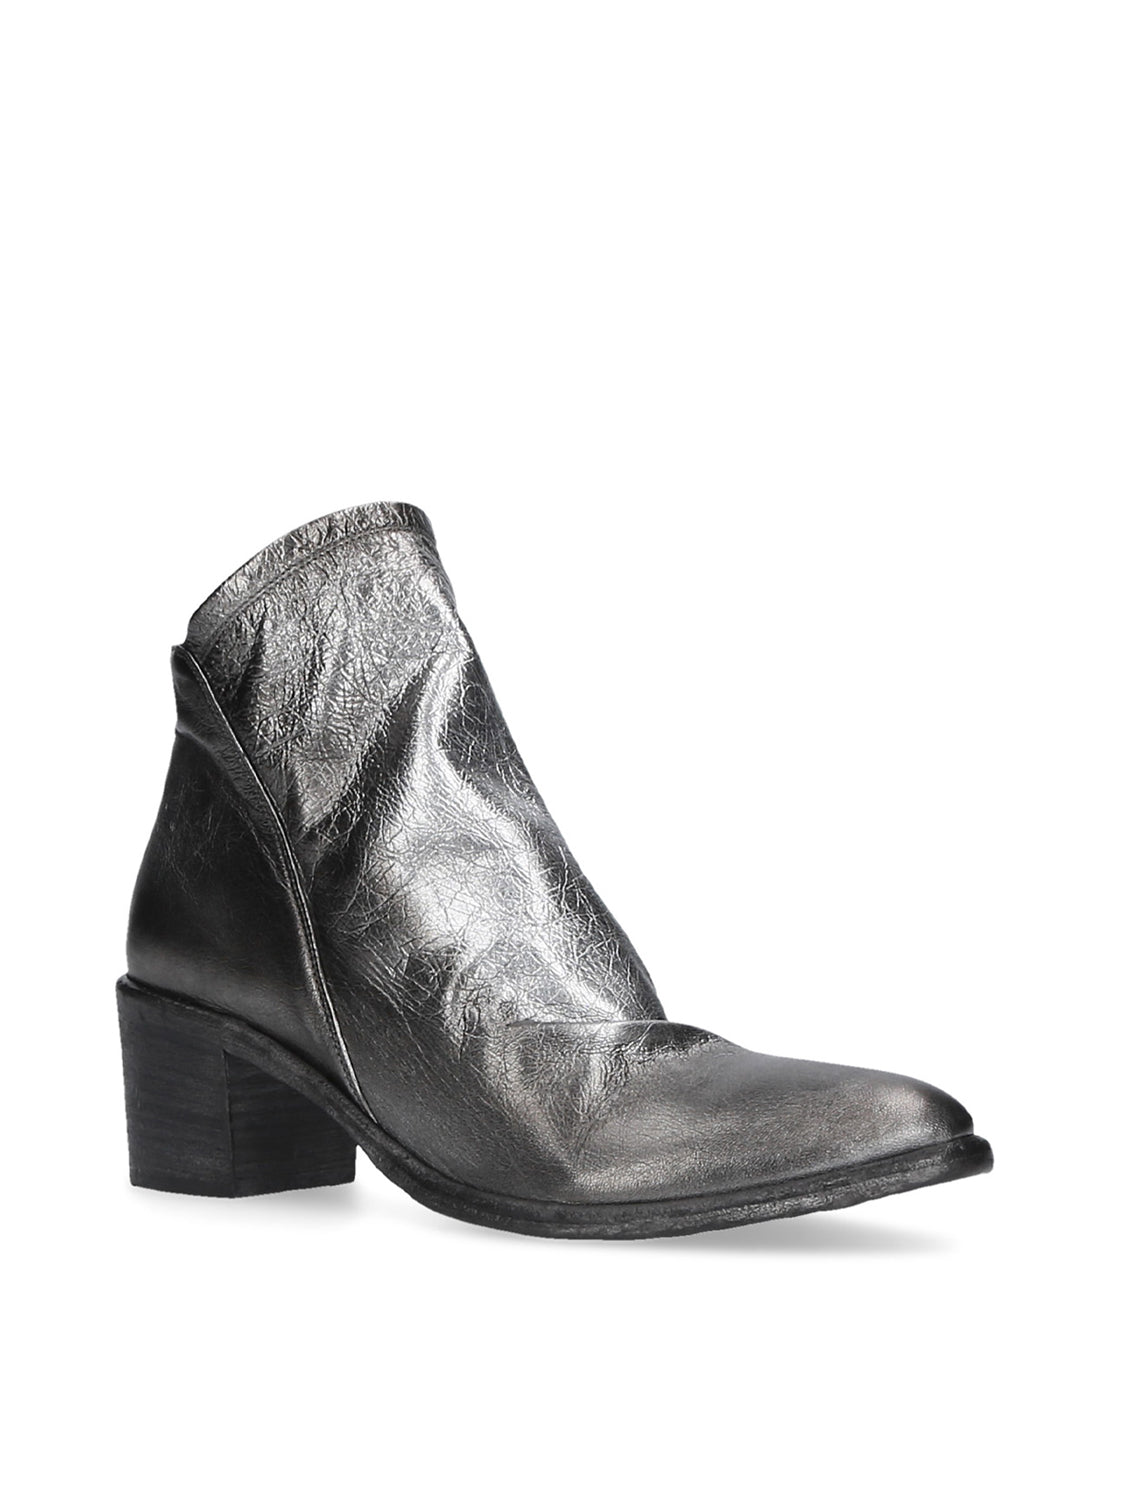 STEEL ANKLE BOOTS